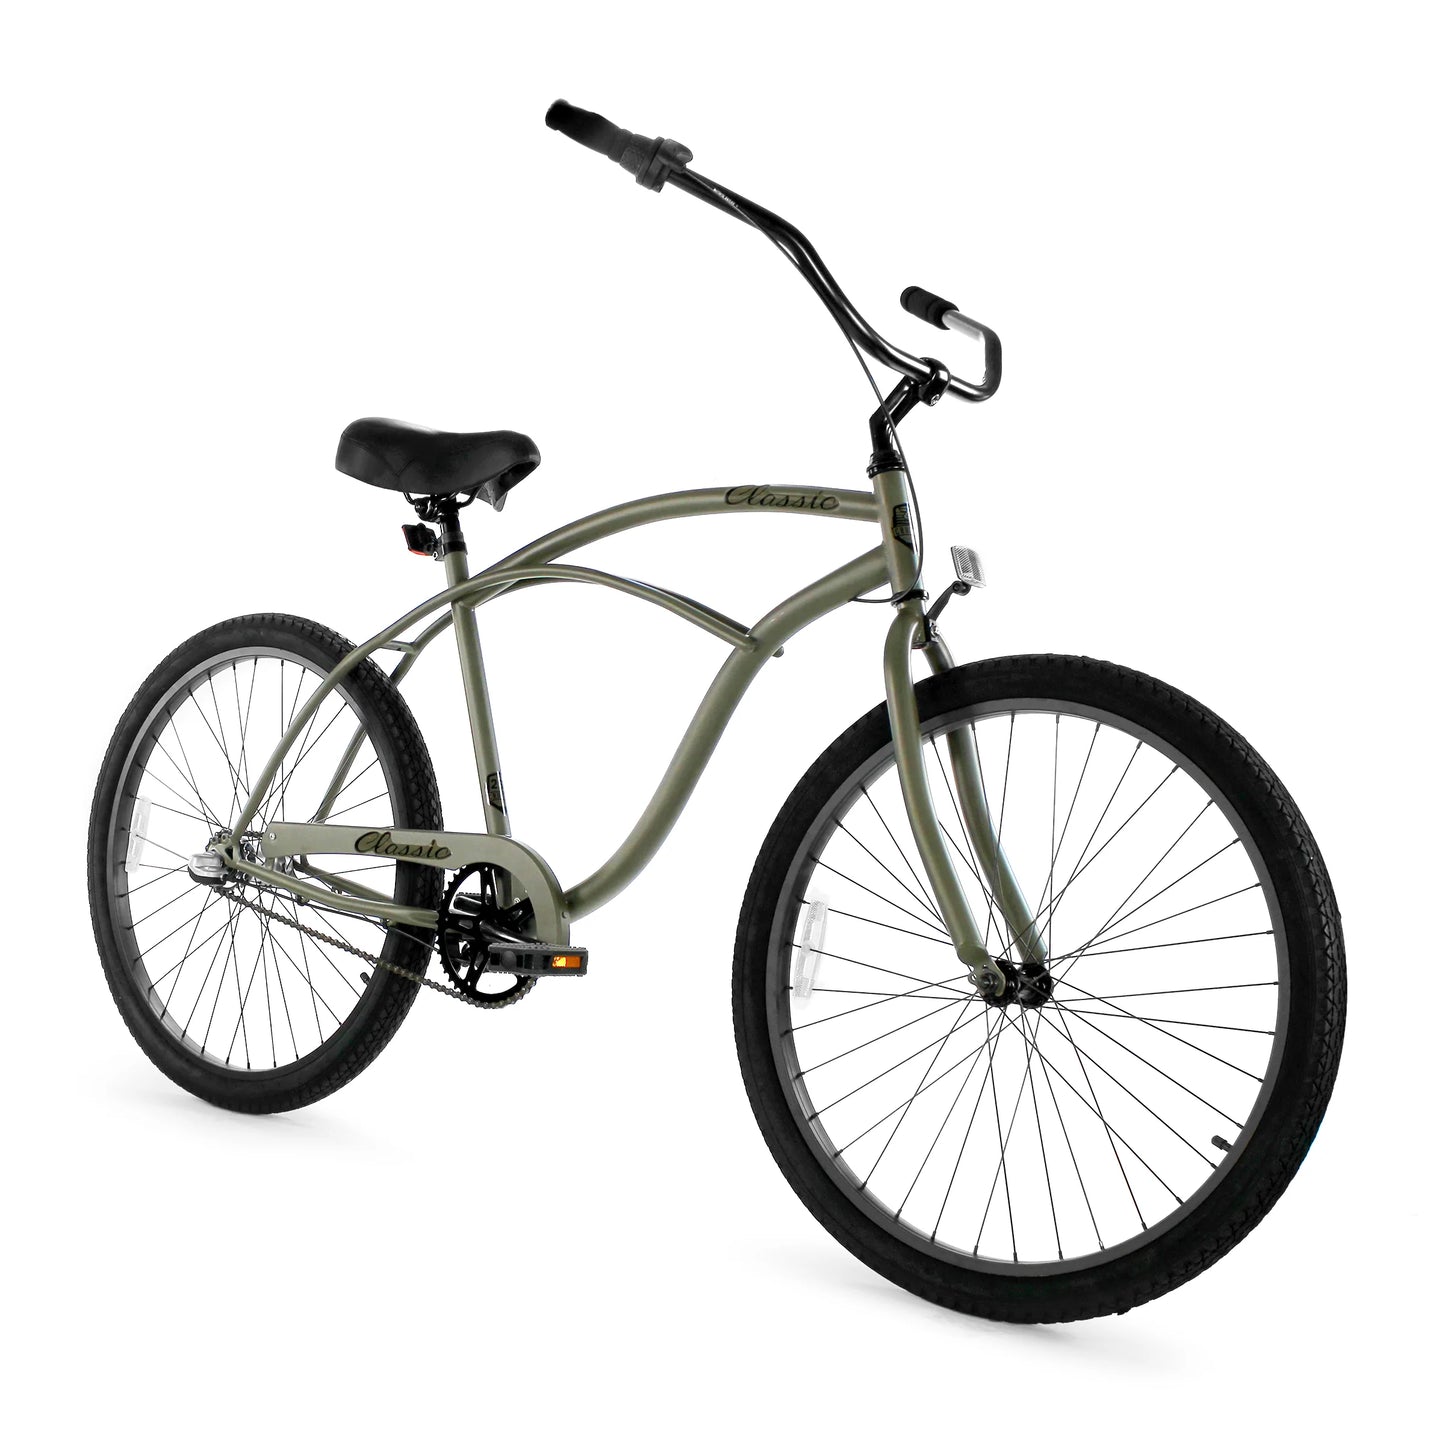 GOLDEN CYCLES 26" CLASSIC BEACH CRUISER MENS 3spd (click for more colors)